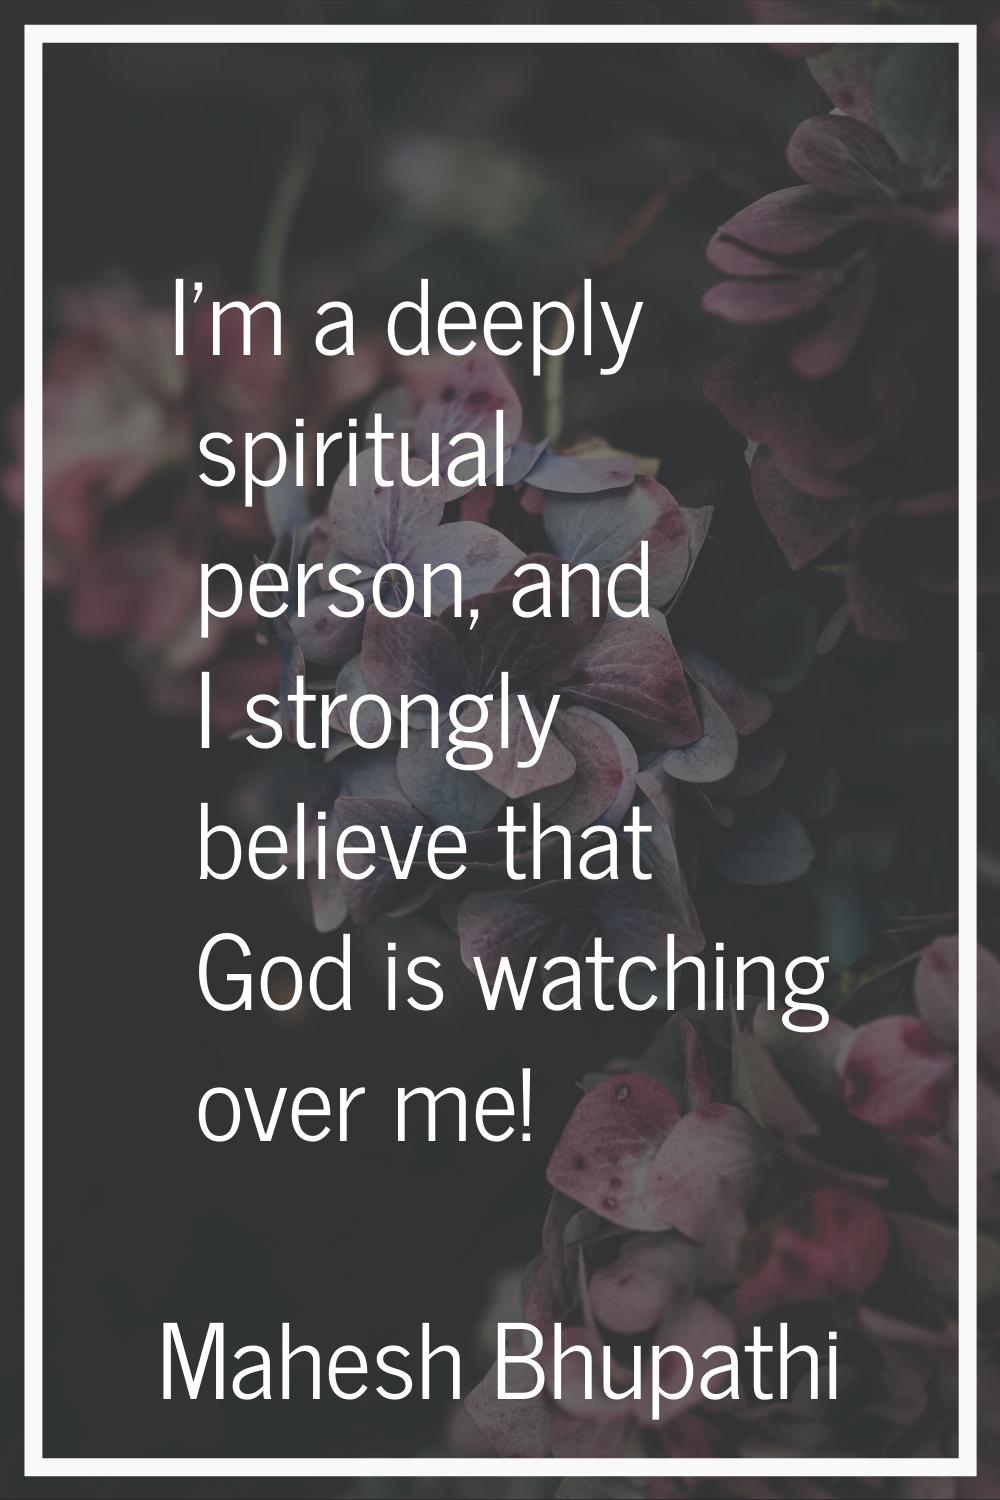 I'm a deeply spiritual person, and I strongly believe that God is watching over me!